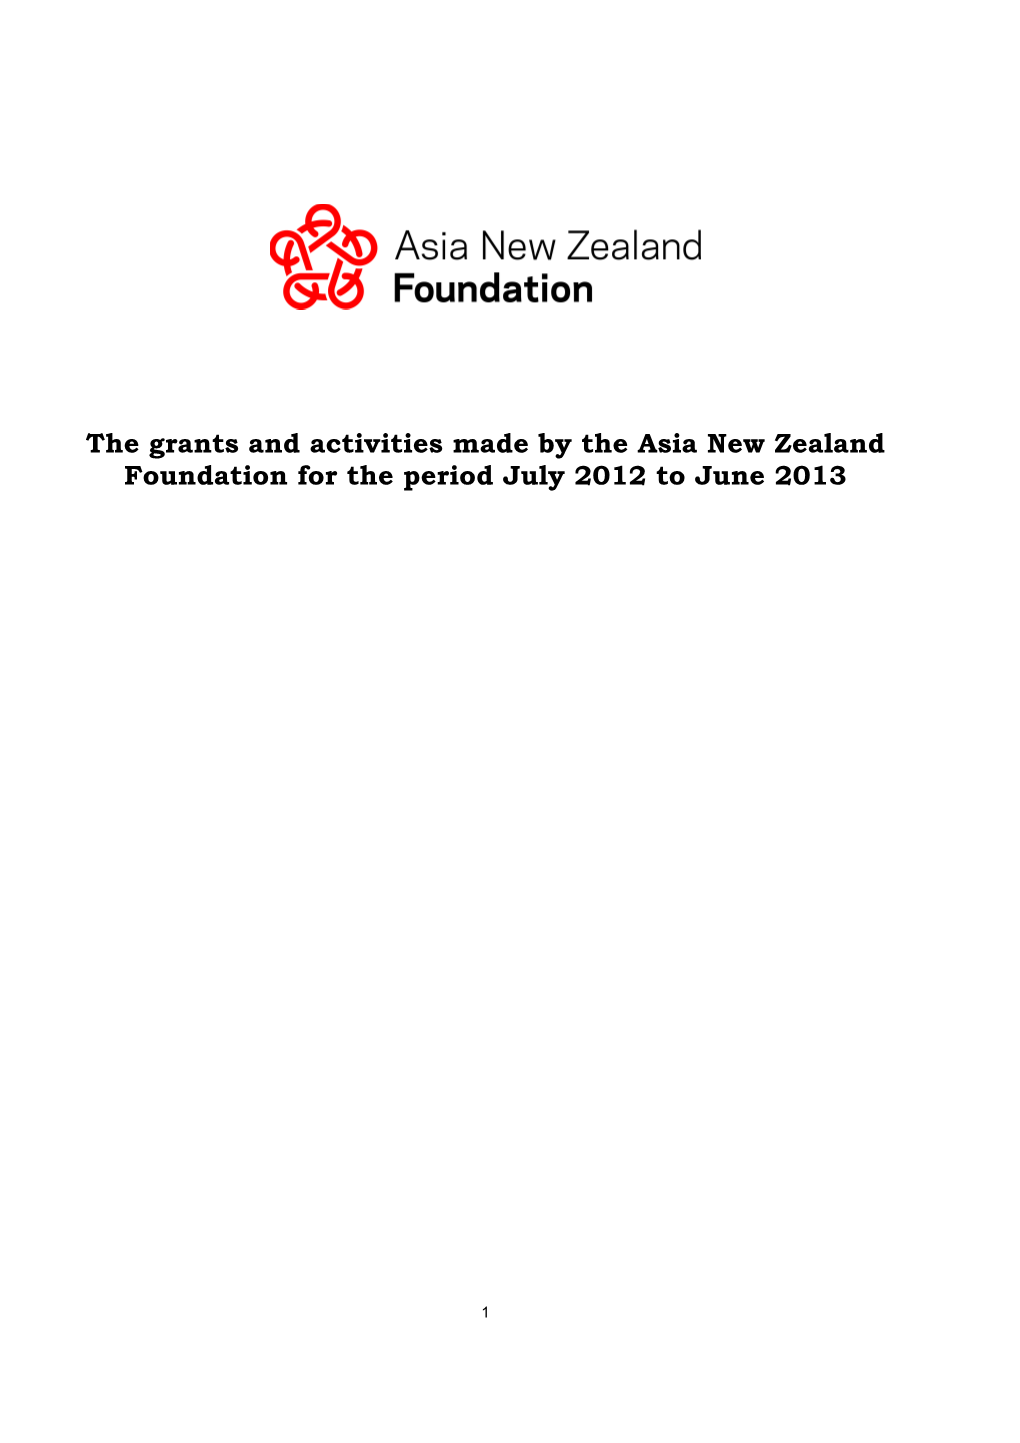 The Grants and Activities Made by the Asia New Zealand Foundation for the Period July 2012 to June 2013